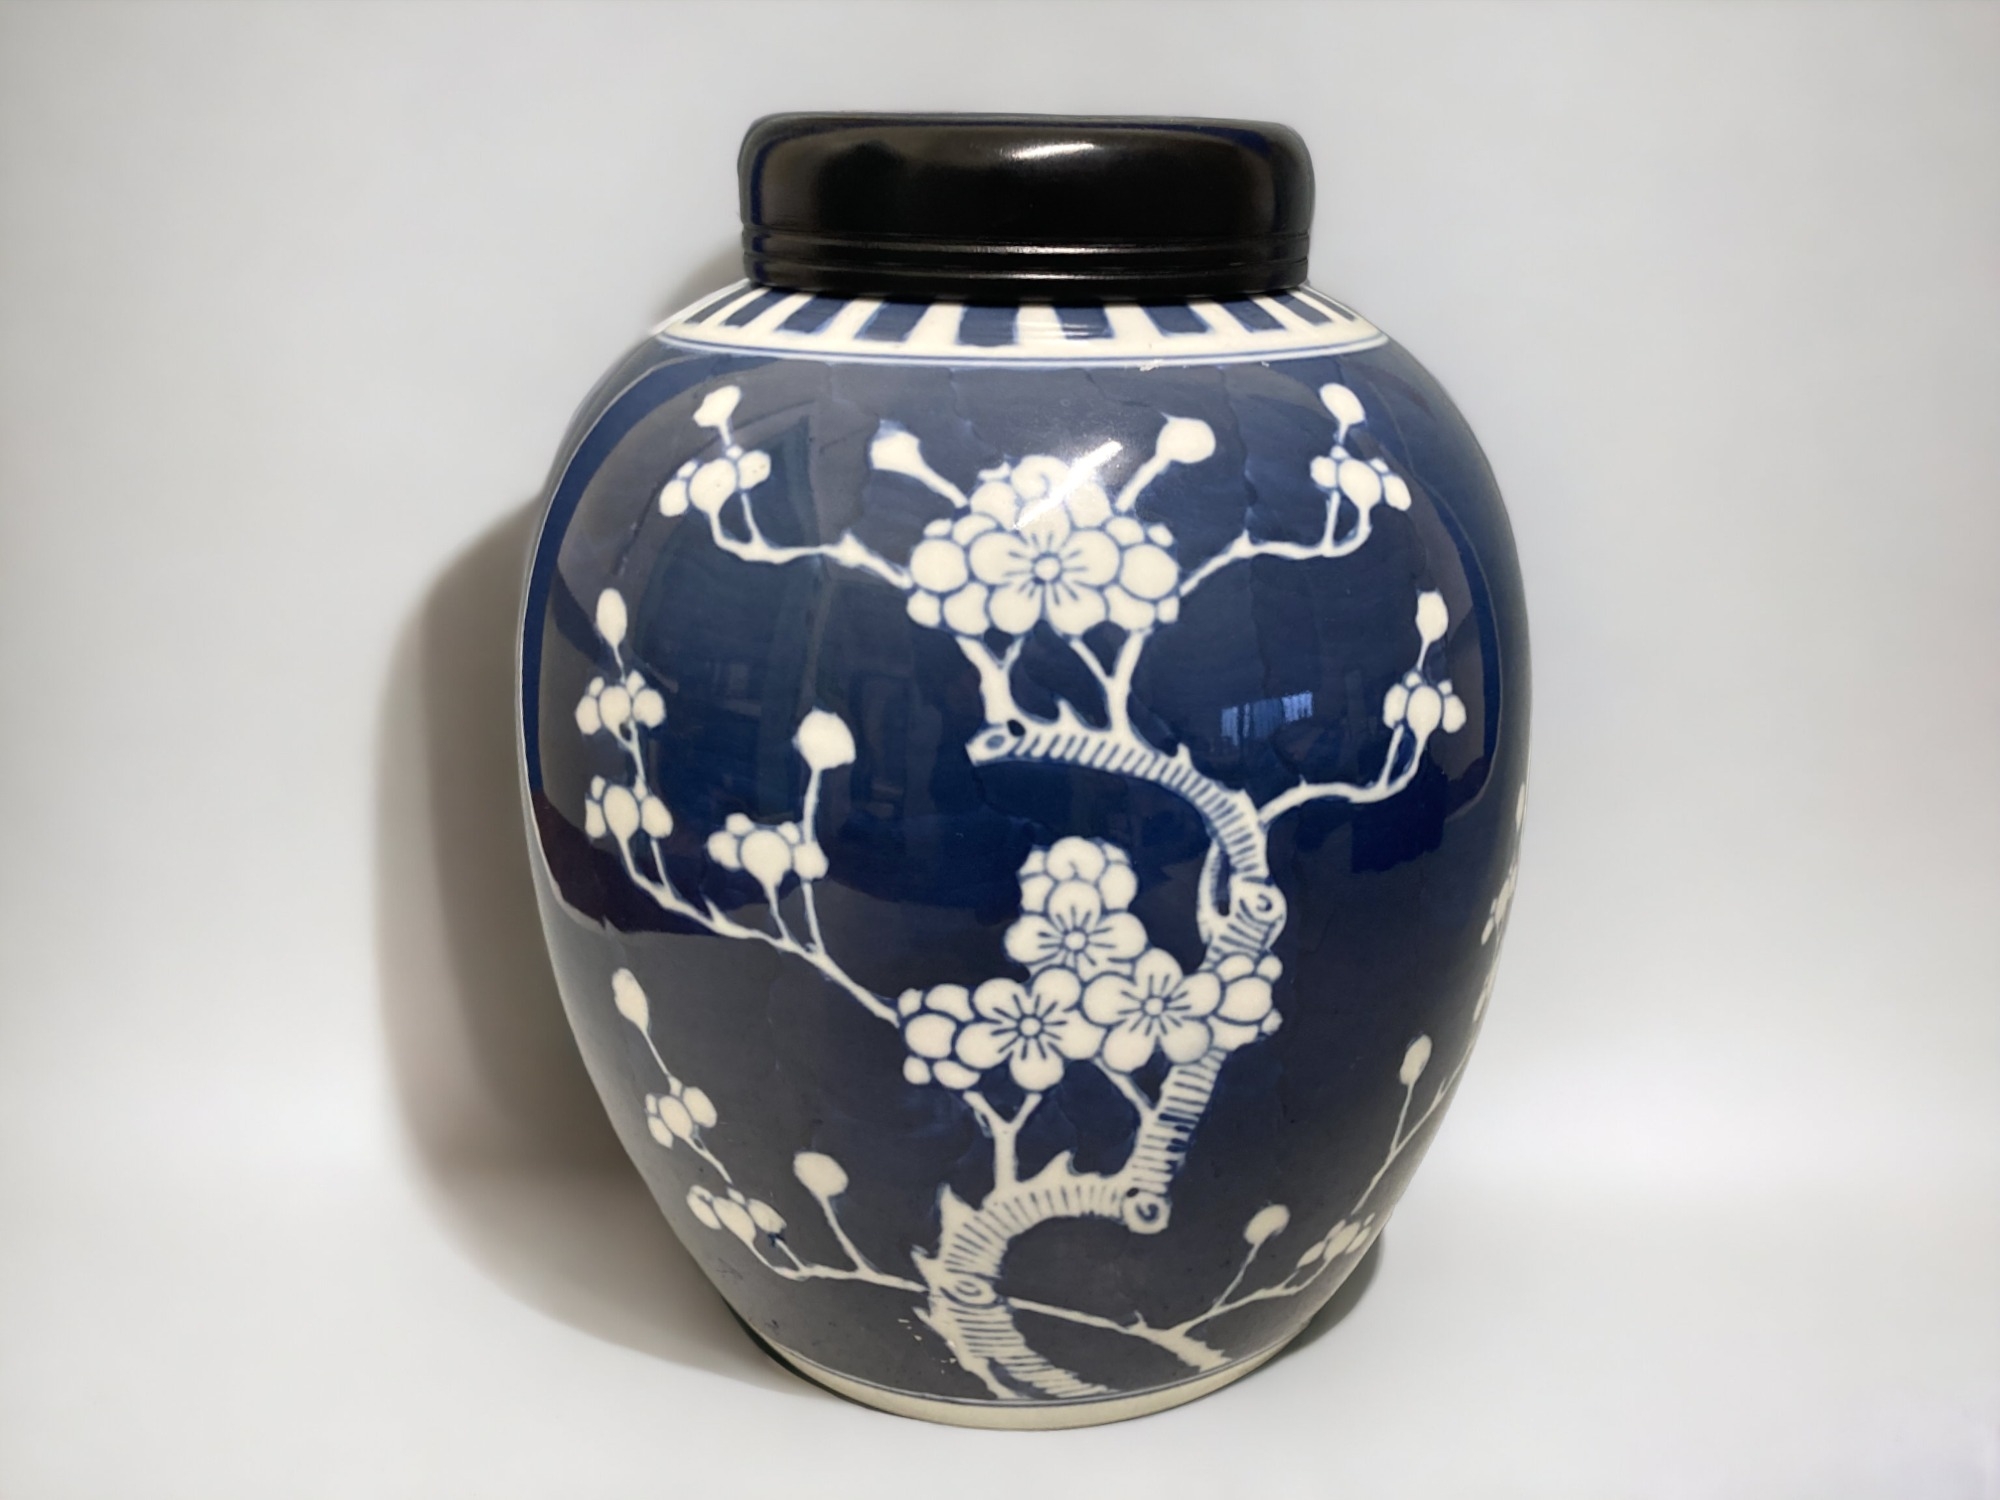 A LARGE CHINESE PORCELAIN JAR & WOODEN COVER. PAINTED PRUNUS PATTERN. HEIGHT - 25CM